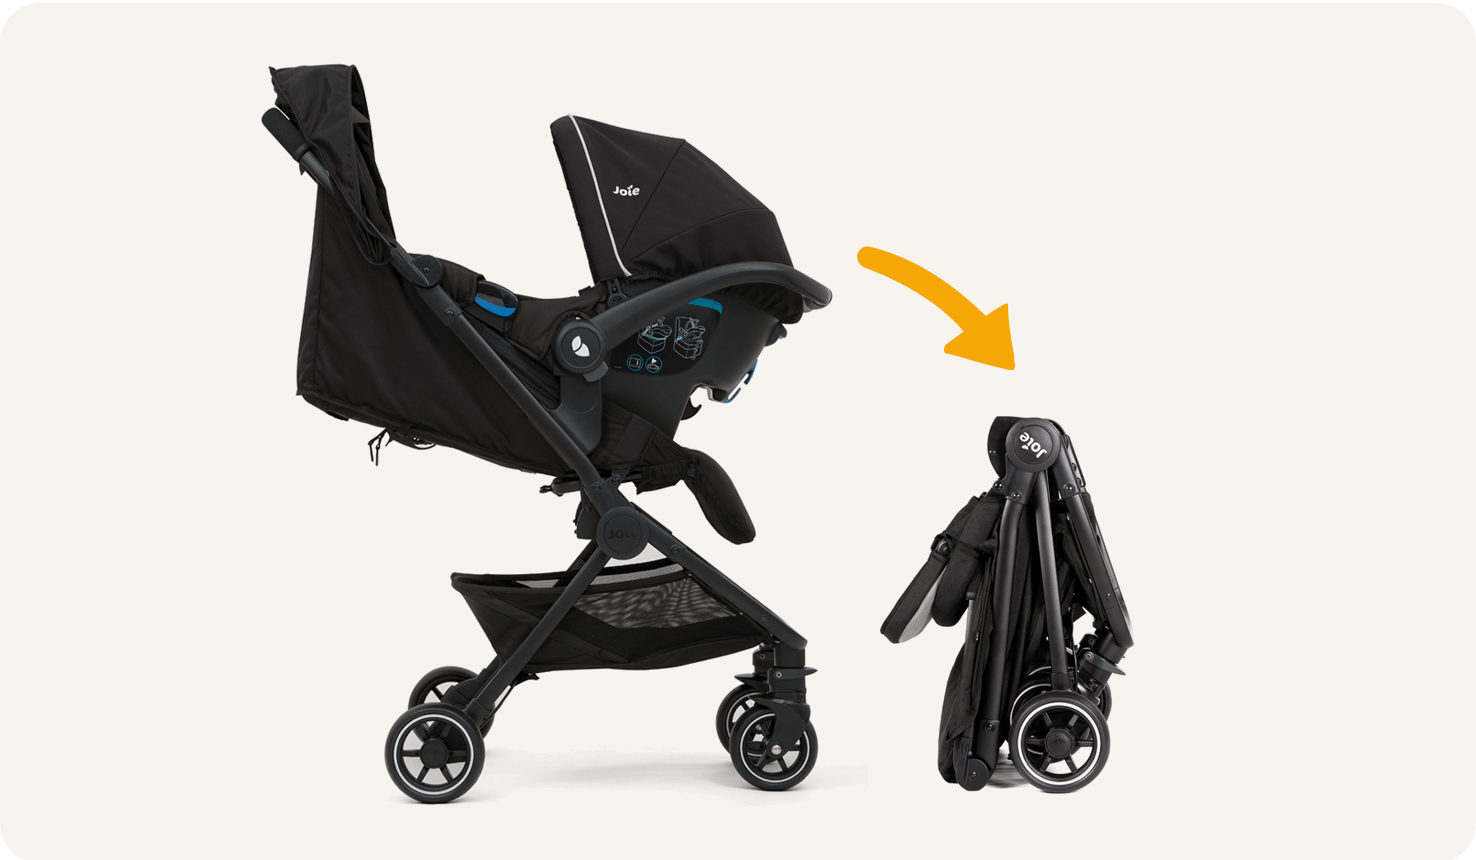  joie pact travel system has a compact fold 